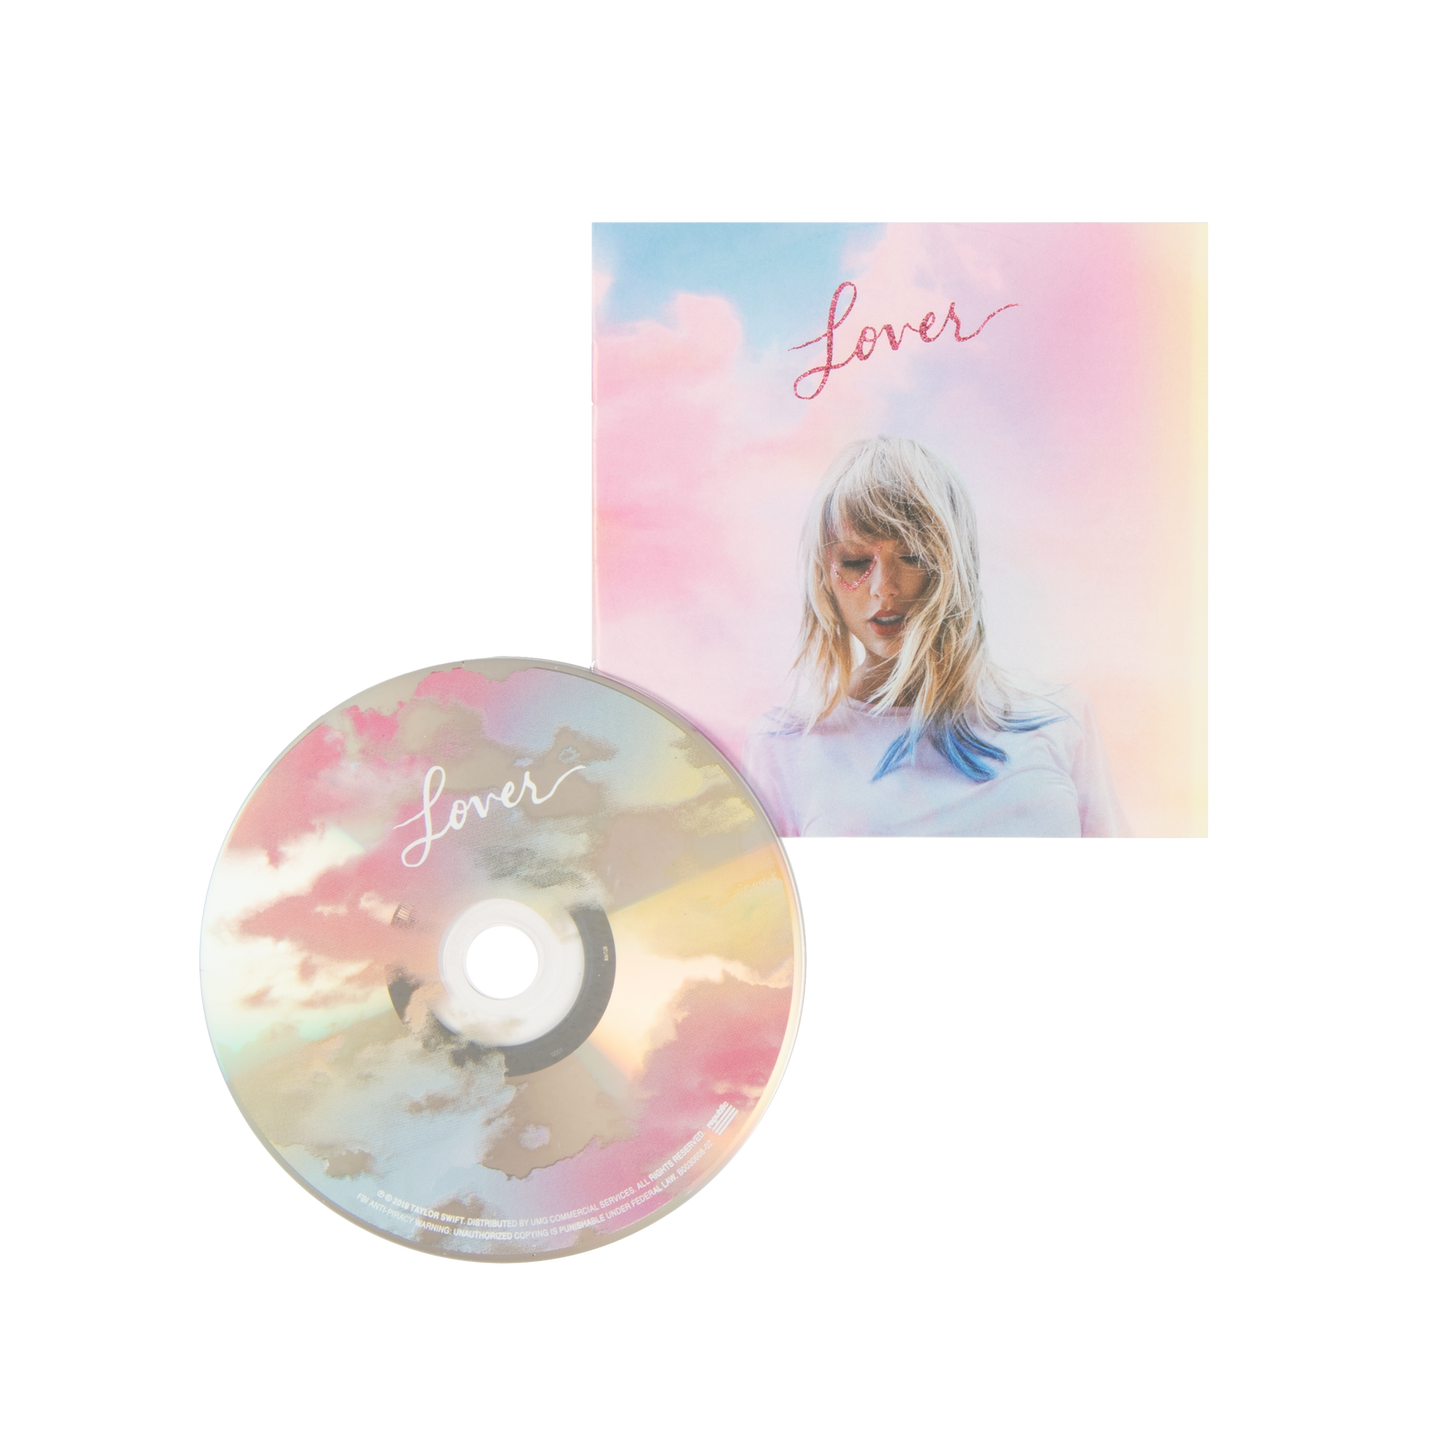 Taylor Swift - Lover CD Deluxe Version 2